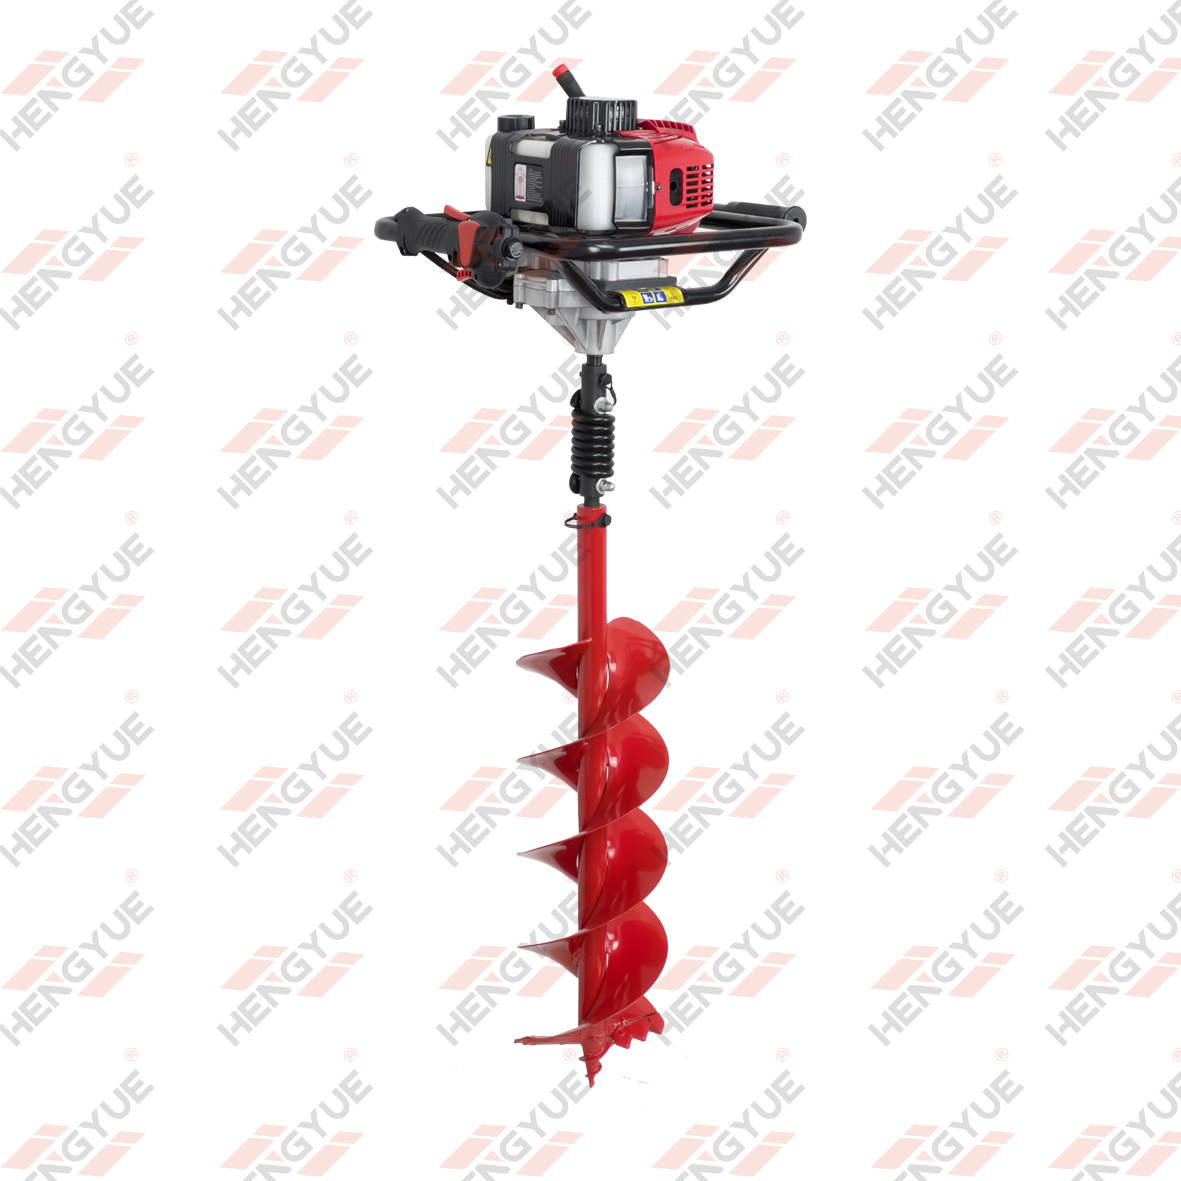 52cc Populer Hand Held Type Earth Auger